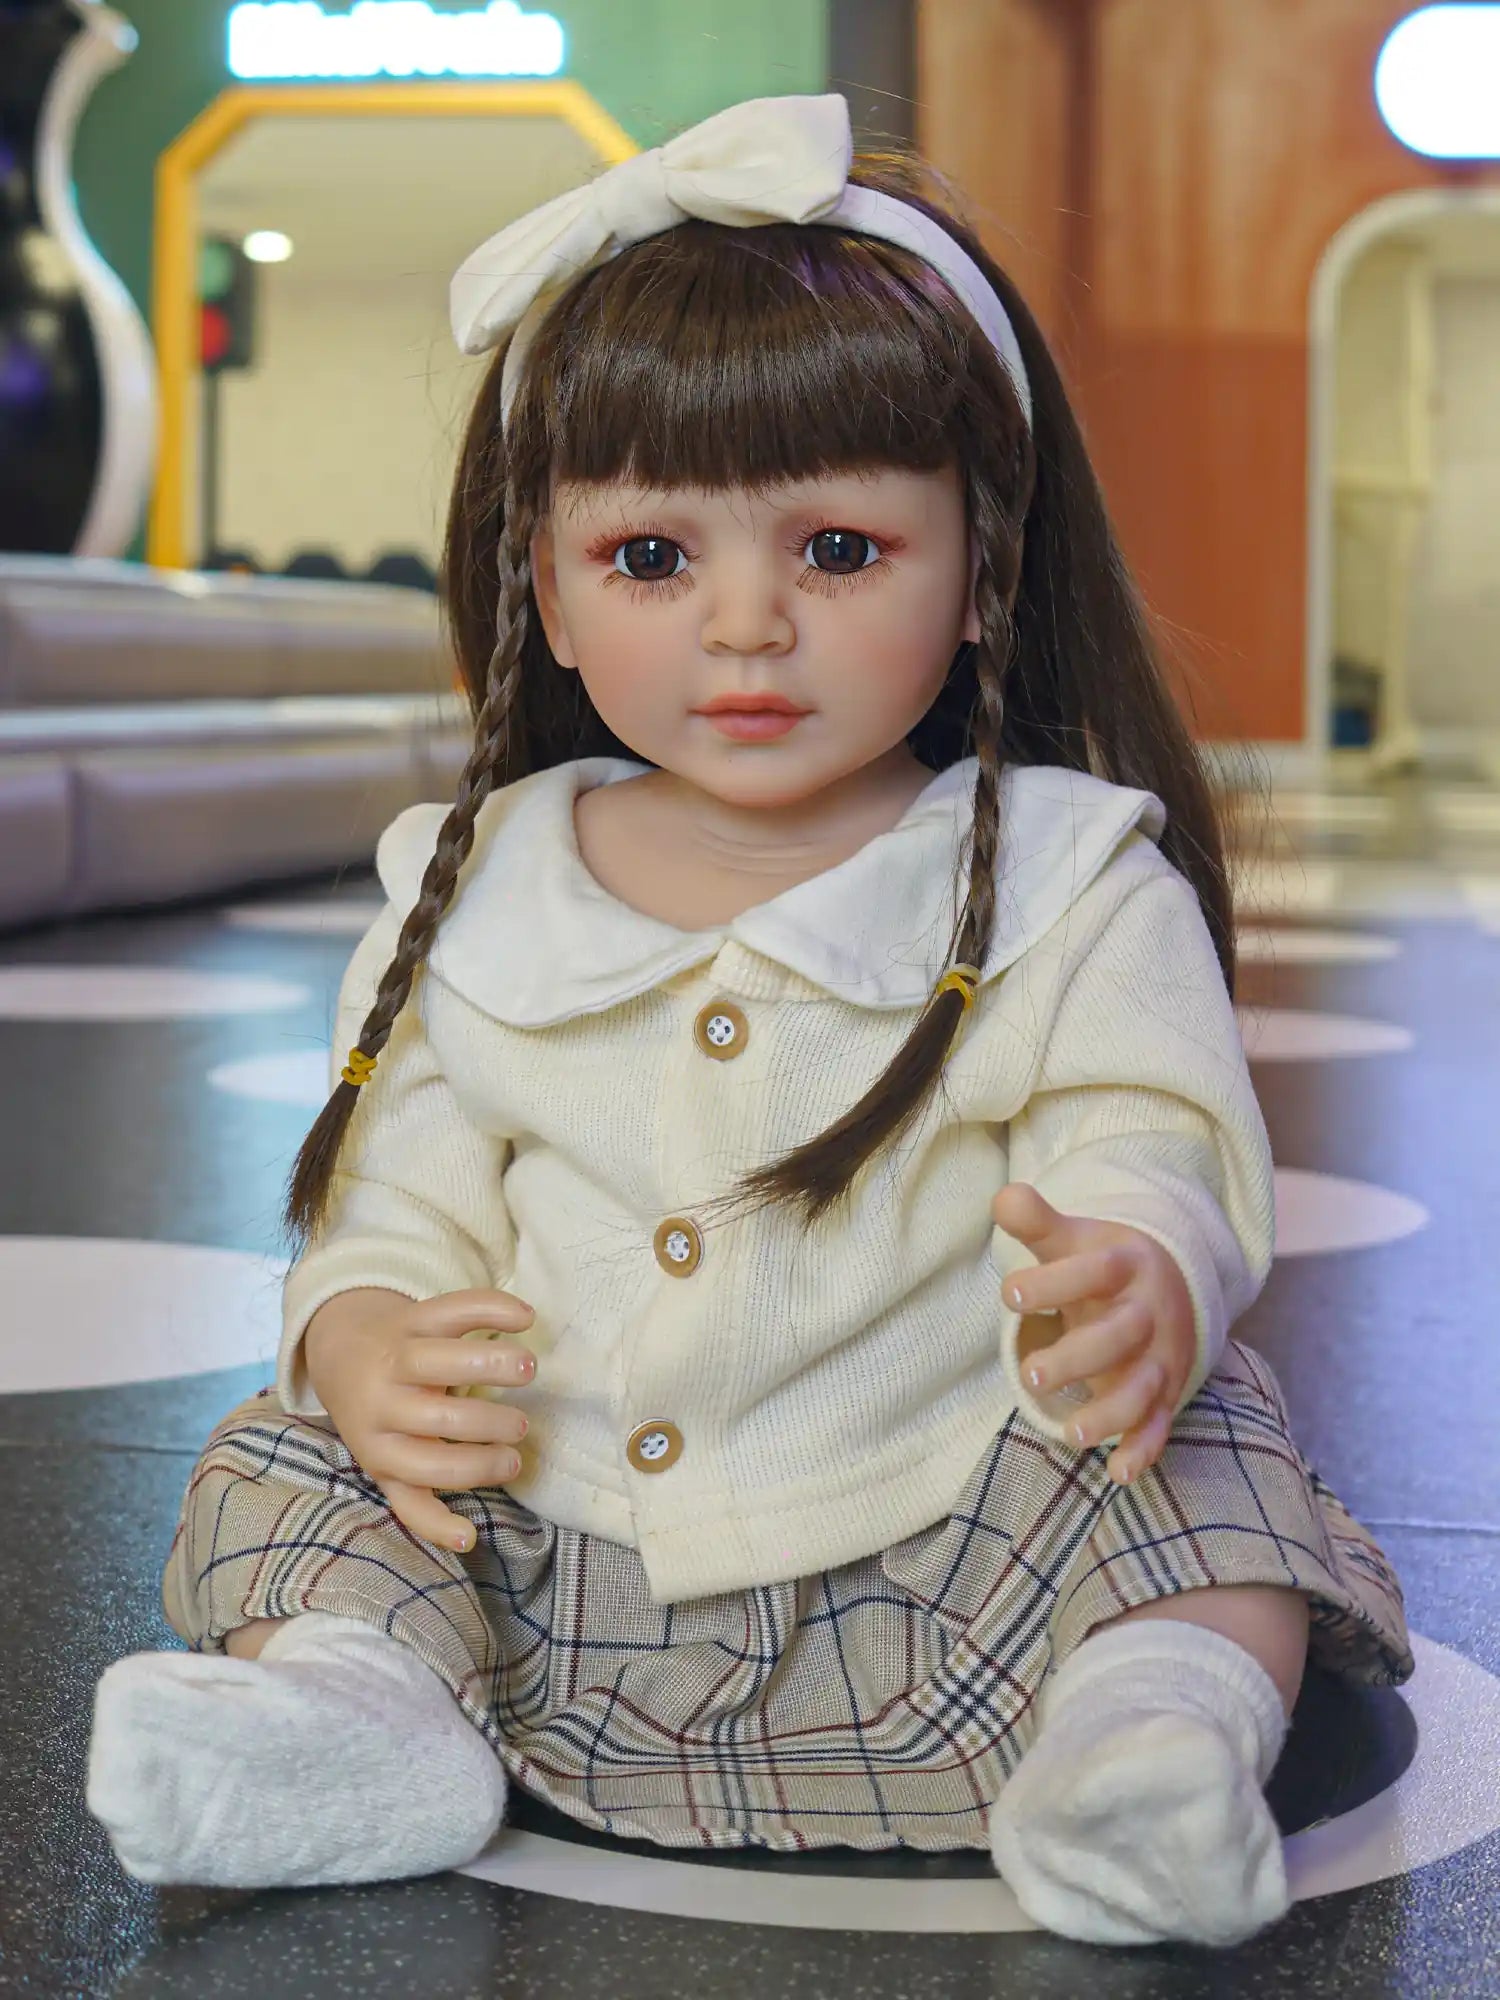 Charming doll capturing the essence of youth, with neatly styled braids and a preppy outfit, ready for storytelling.